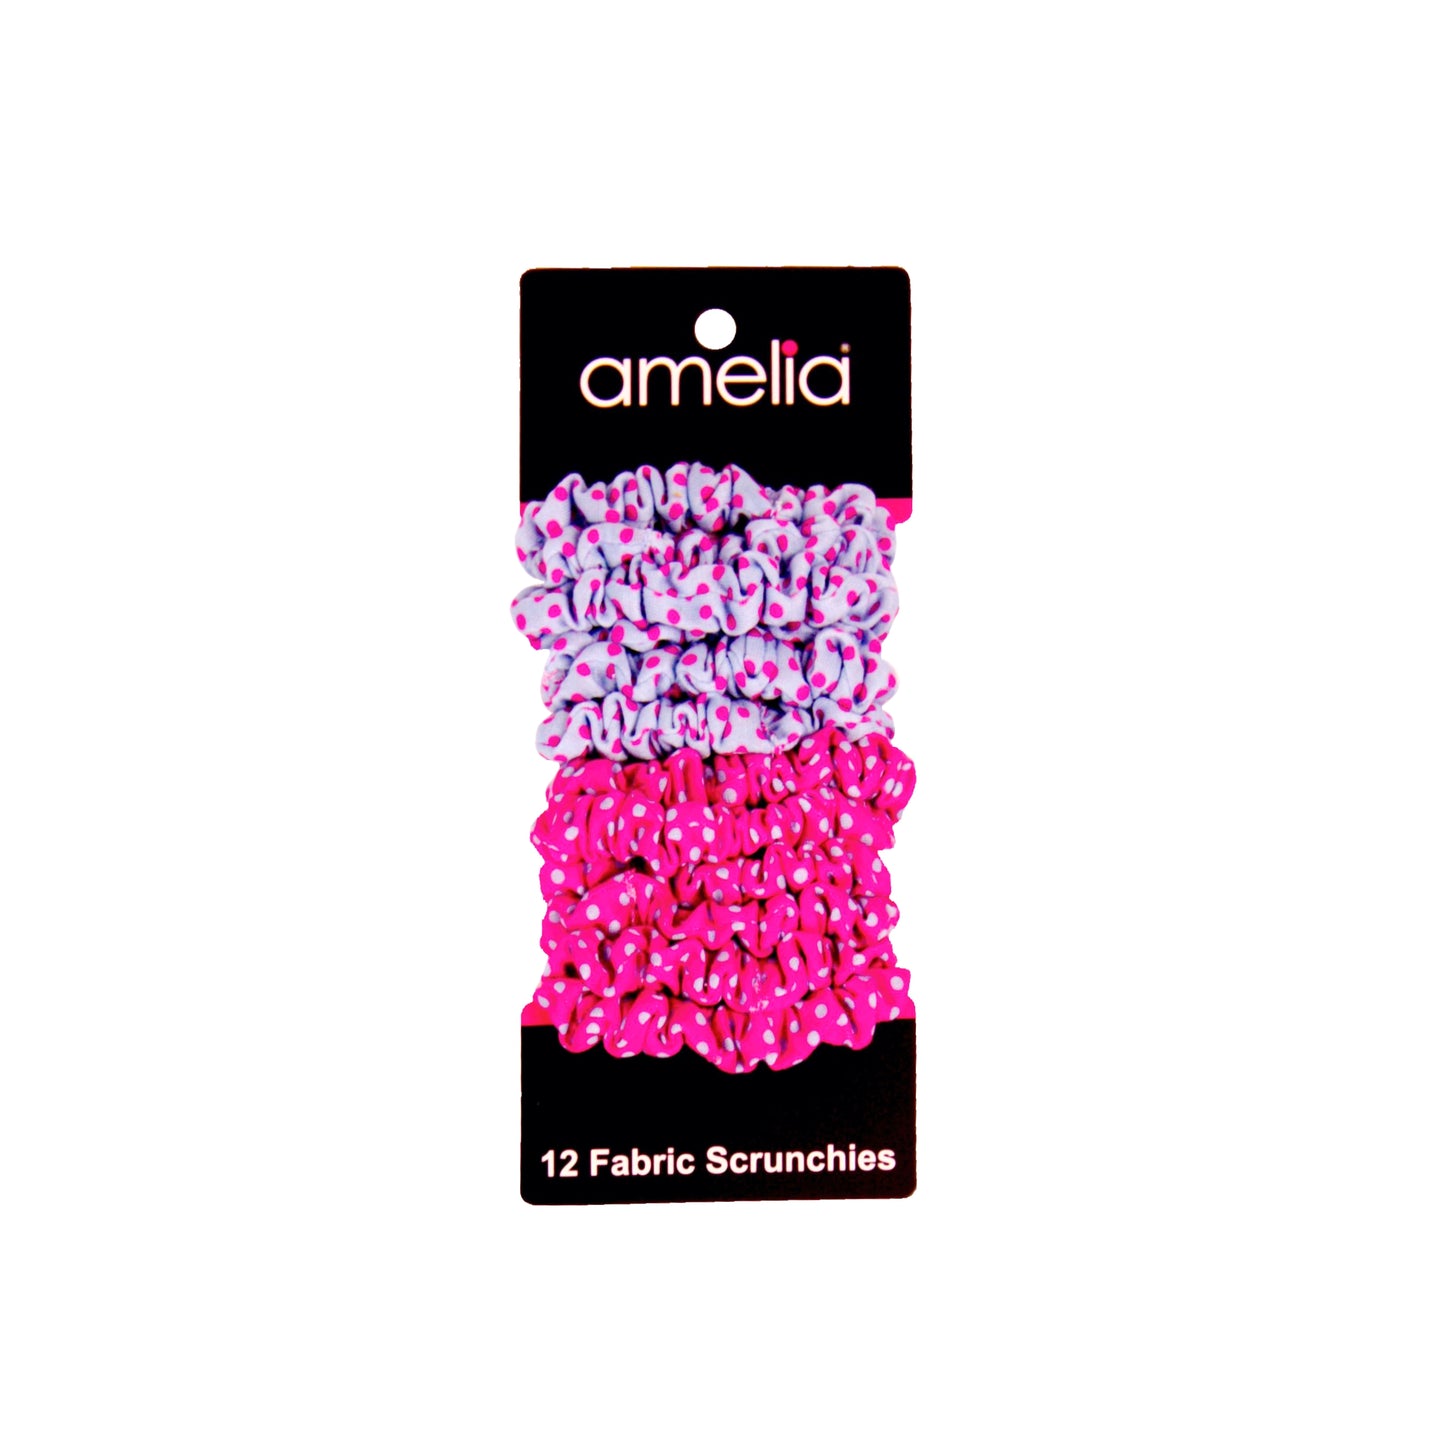 Amelia Beauty, Pink and Blue Polka Dot Mix Jersey Scrunchies, 2.25in Diameter, Gentle on Hair, Strong Hold, No Snag, No Dents or Creases. 12 Pack